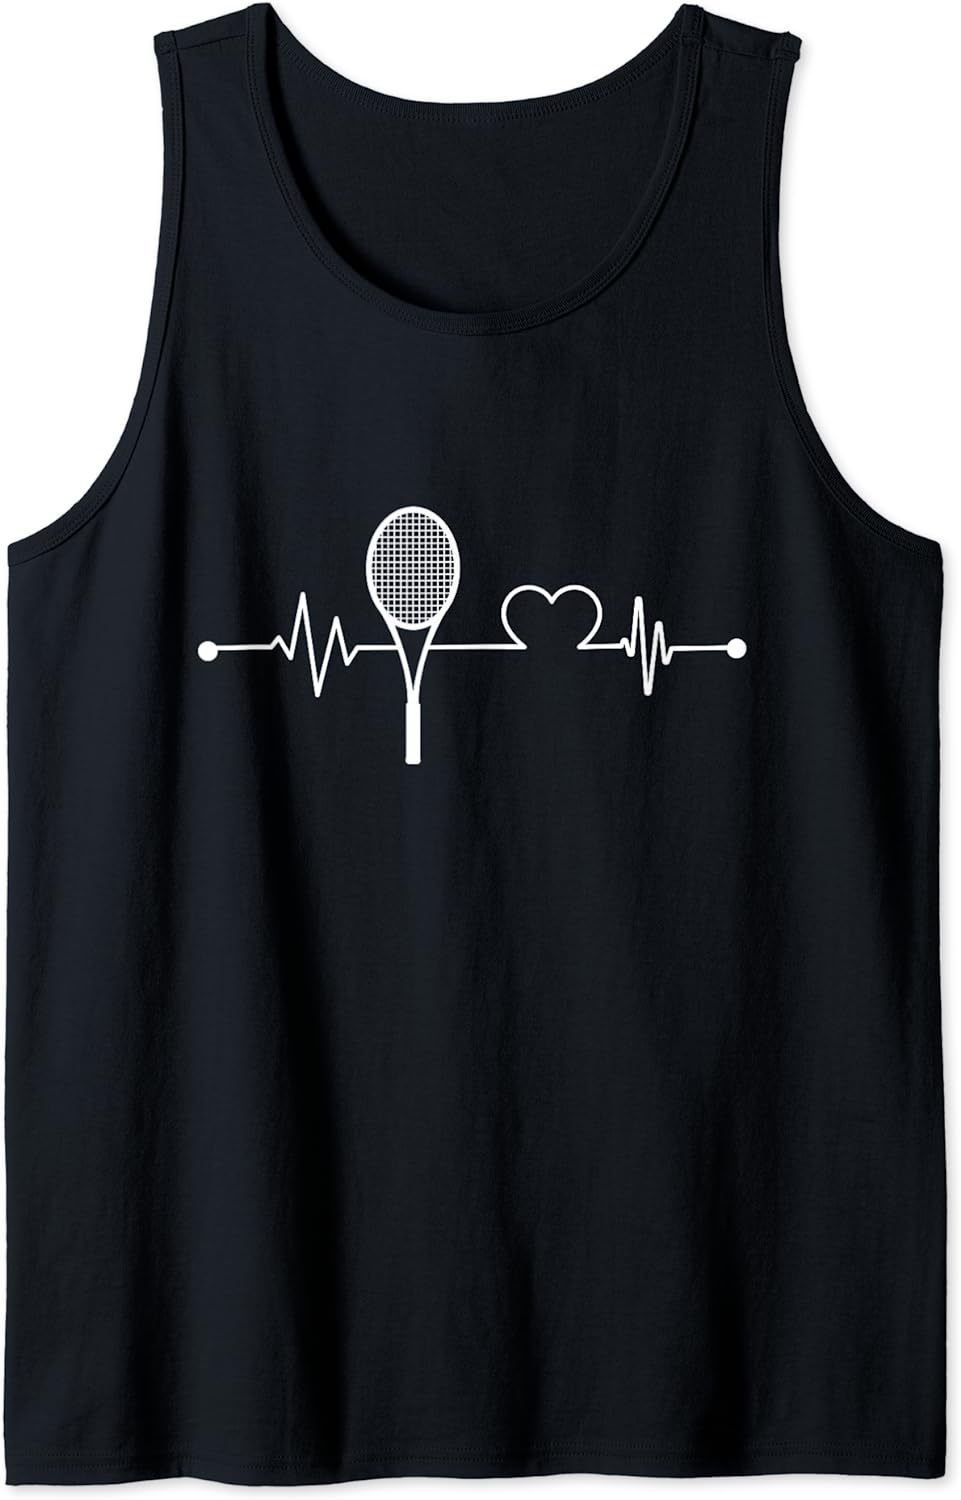 Tennis Heartbeat Tennis Lovers and Tennis players Apparel Tank Top Best Price